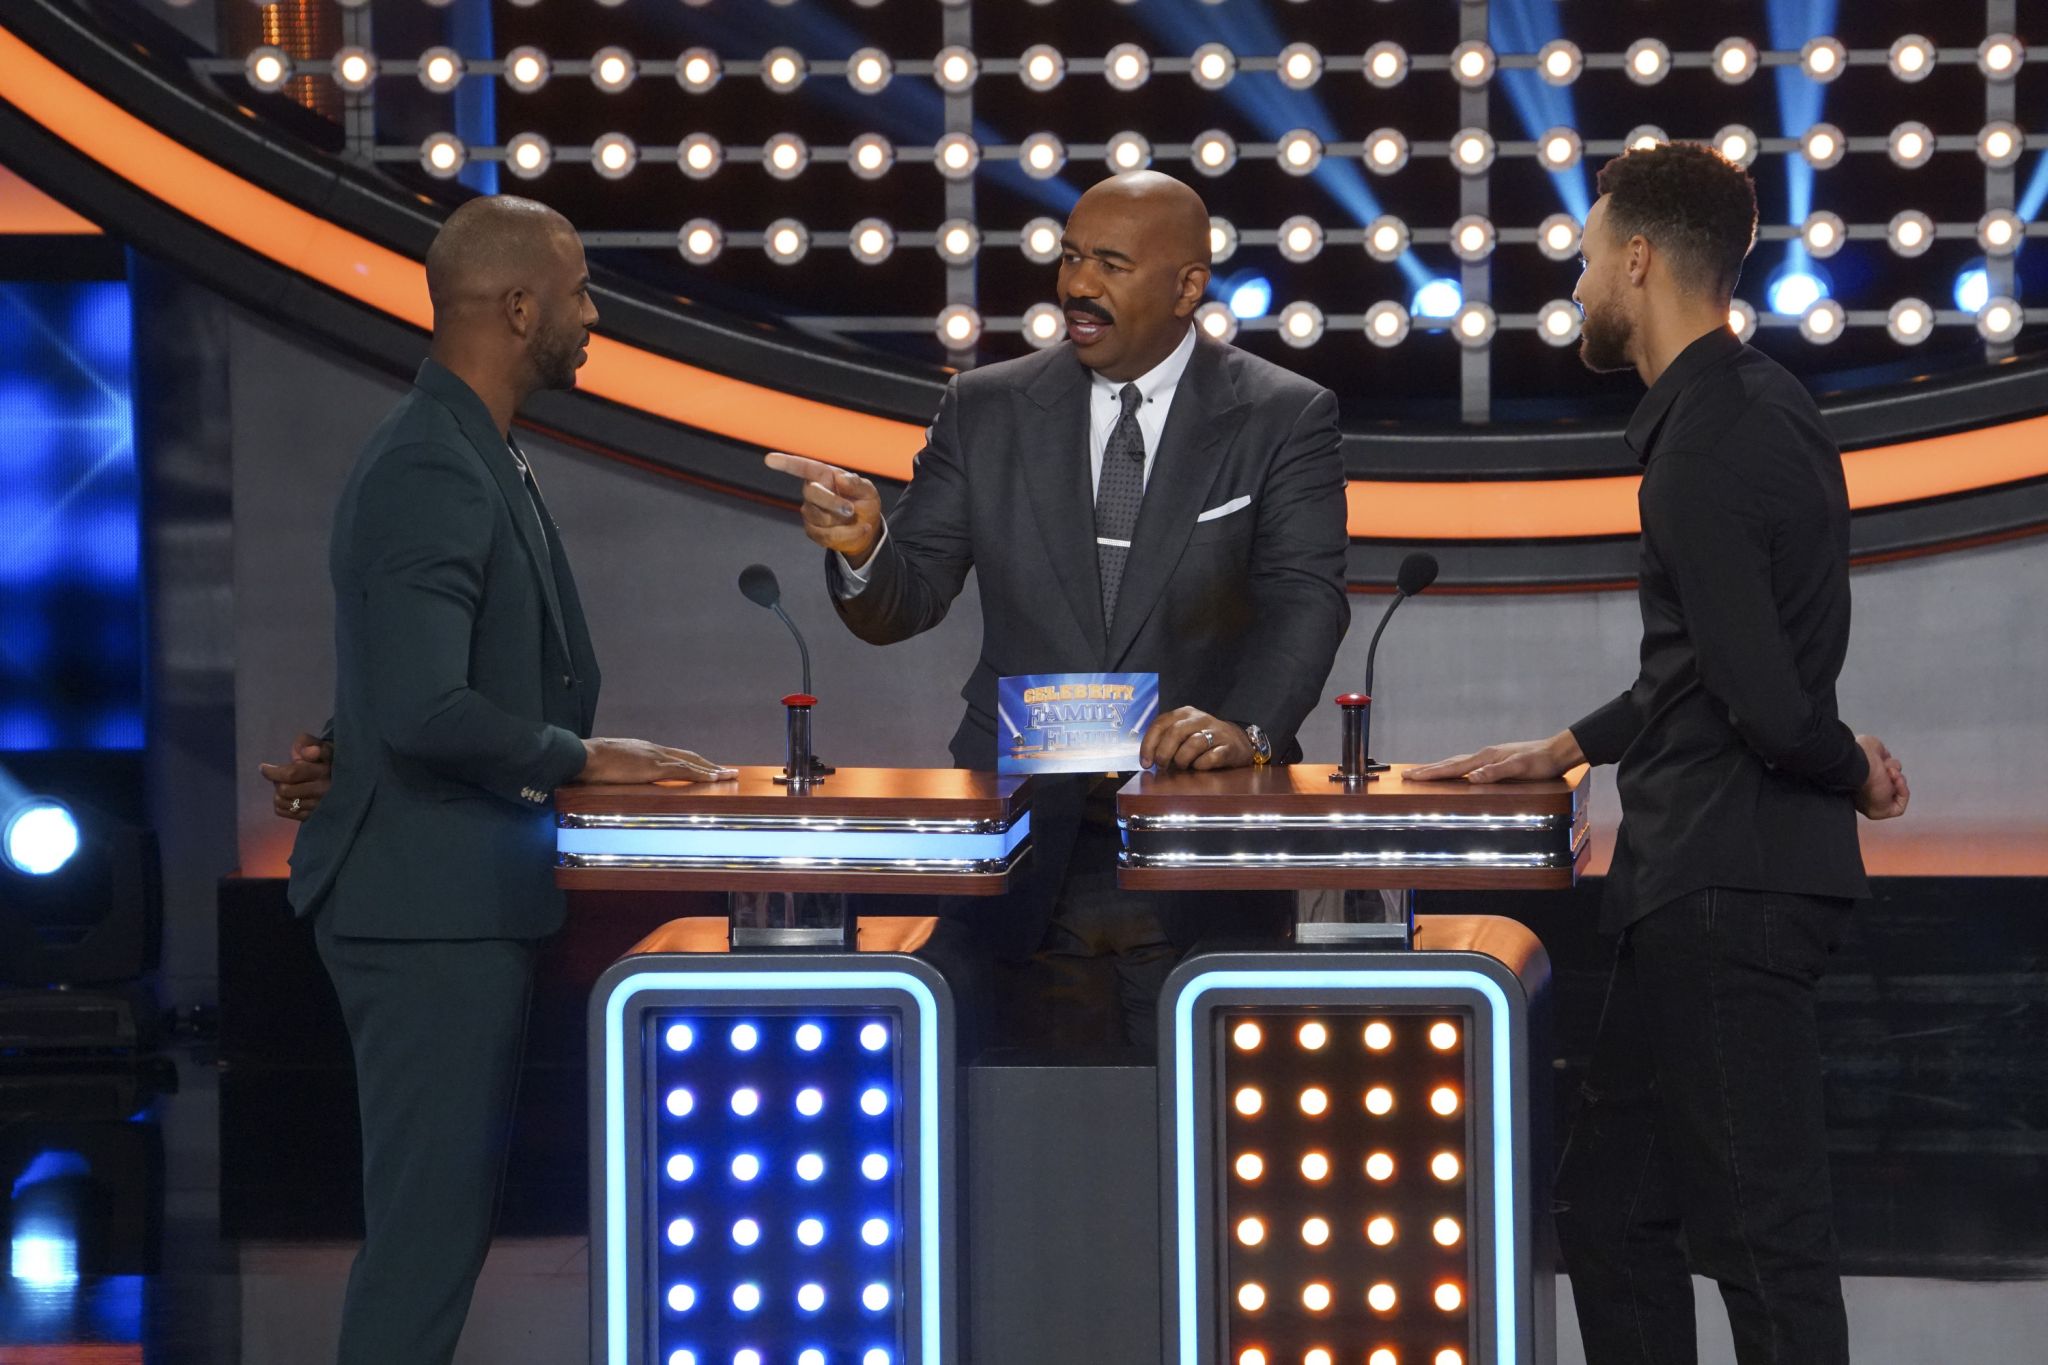 Ayesha Curry crushes it on celeb 'Family Feud' episode with Stephen Curry